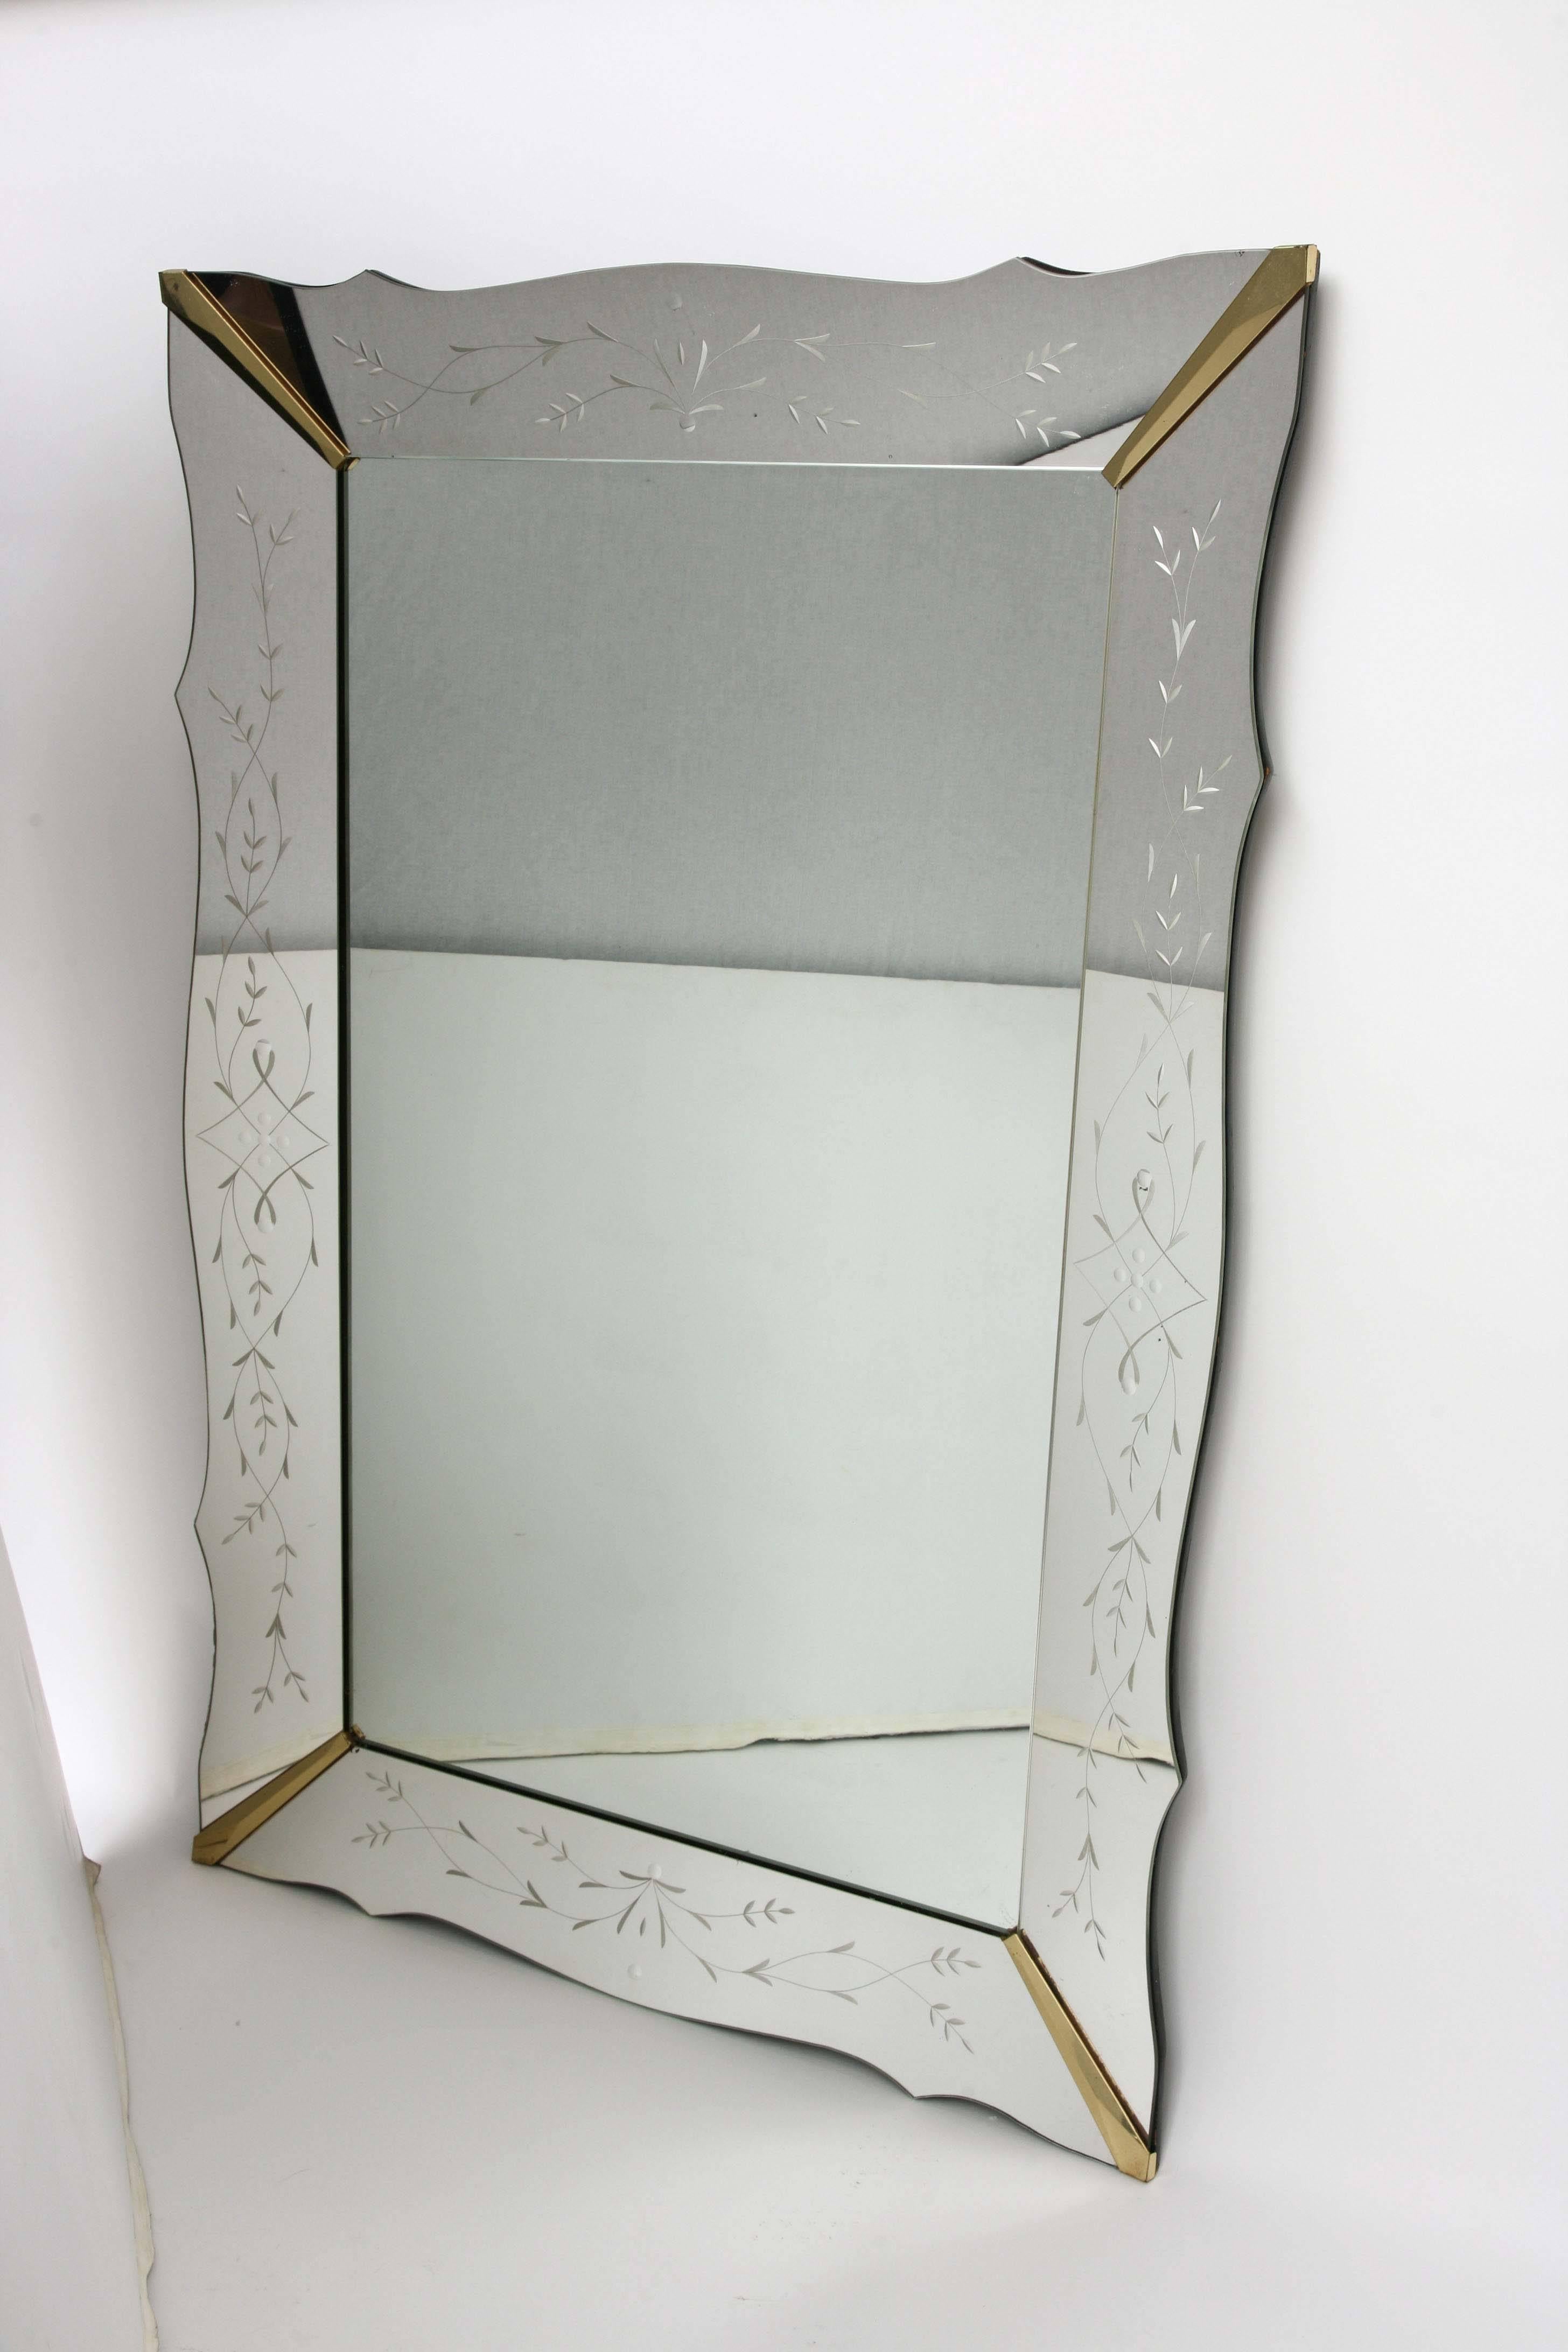 Very large Venetian style mirror with scalloped edge. Flower etching on the mirrored side panels separated by brass corner beads.